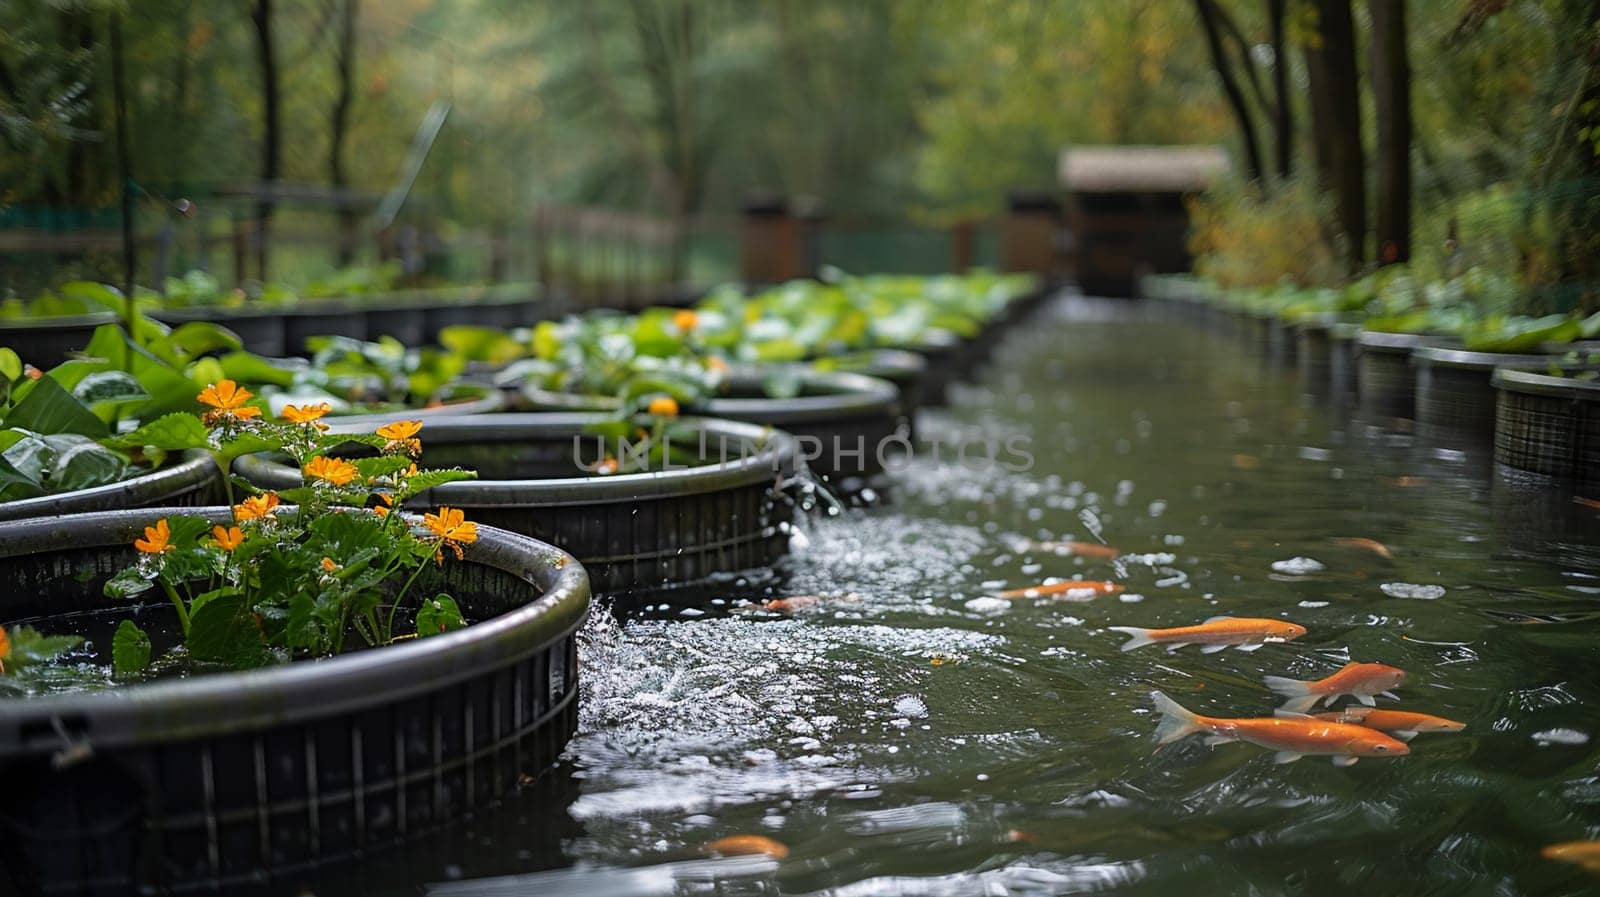 Tranquil koi pond reflects nature's beauty amid lush plants and blooms